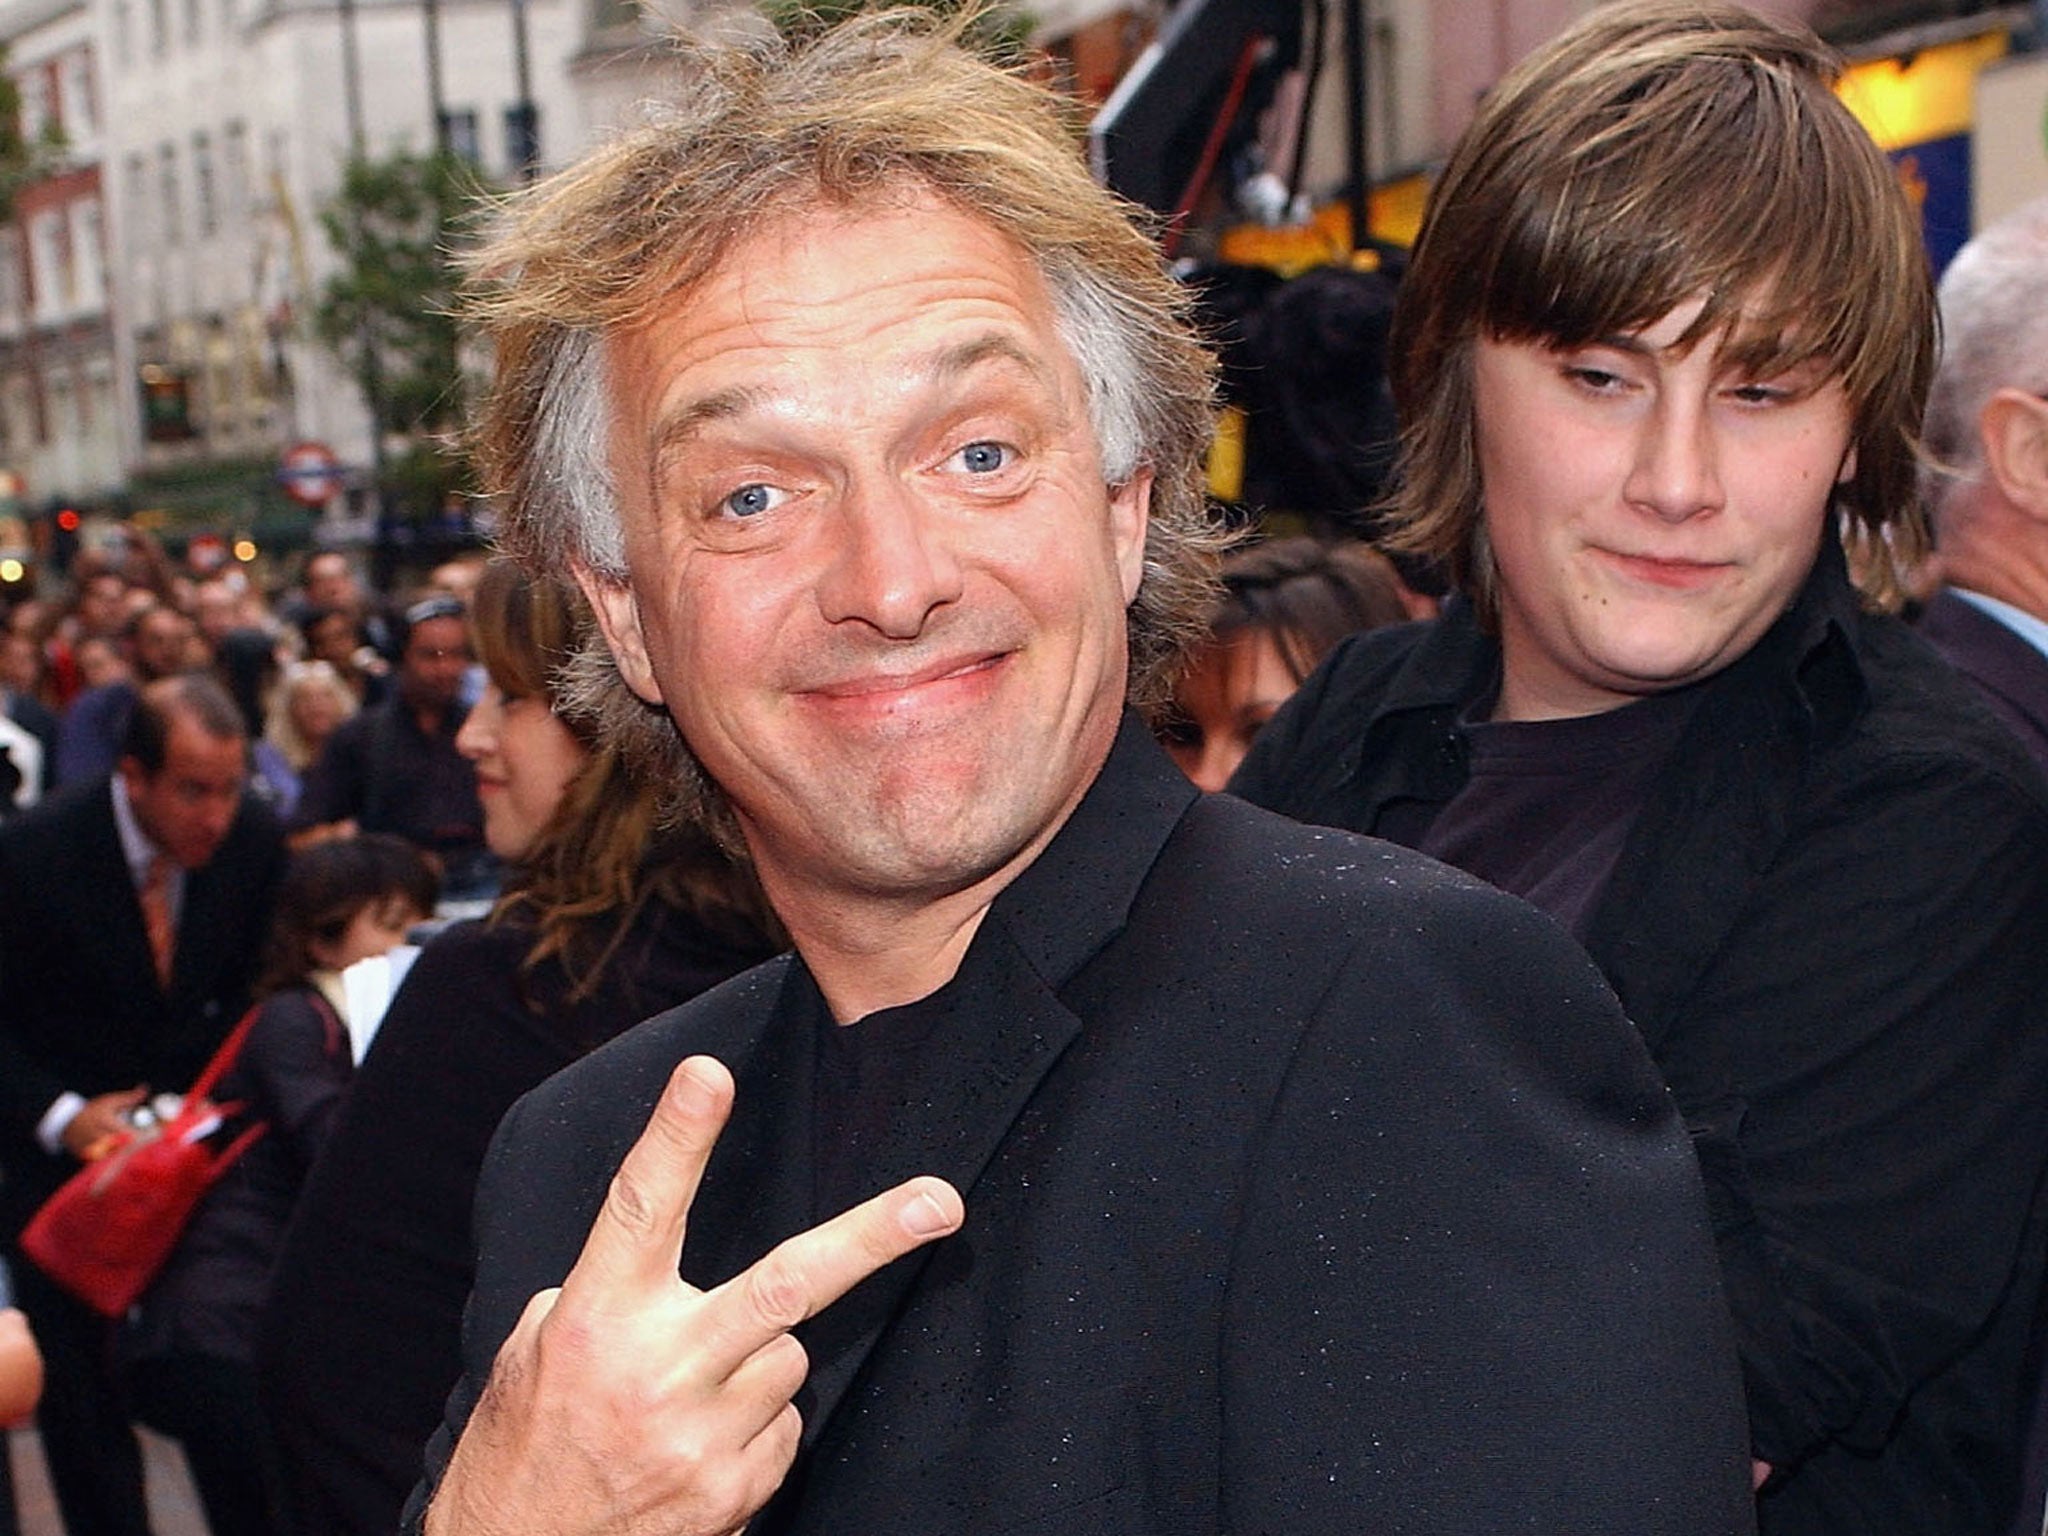 The late actor Rik Mayall was cut from the Harry Potter franchise, it has been revealed